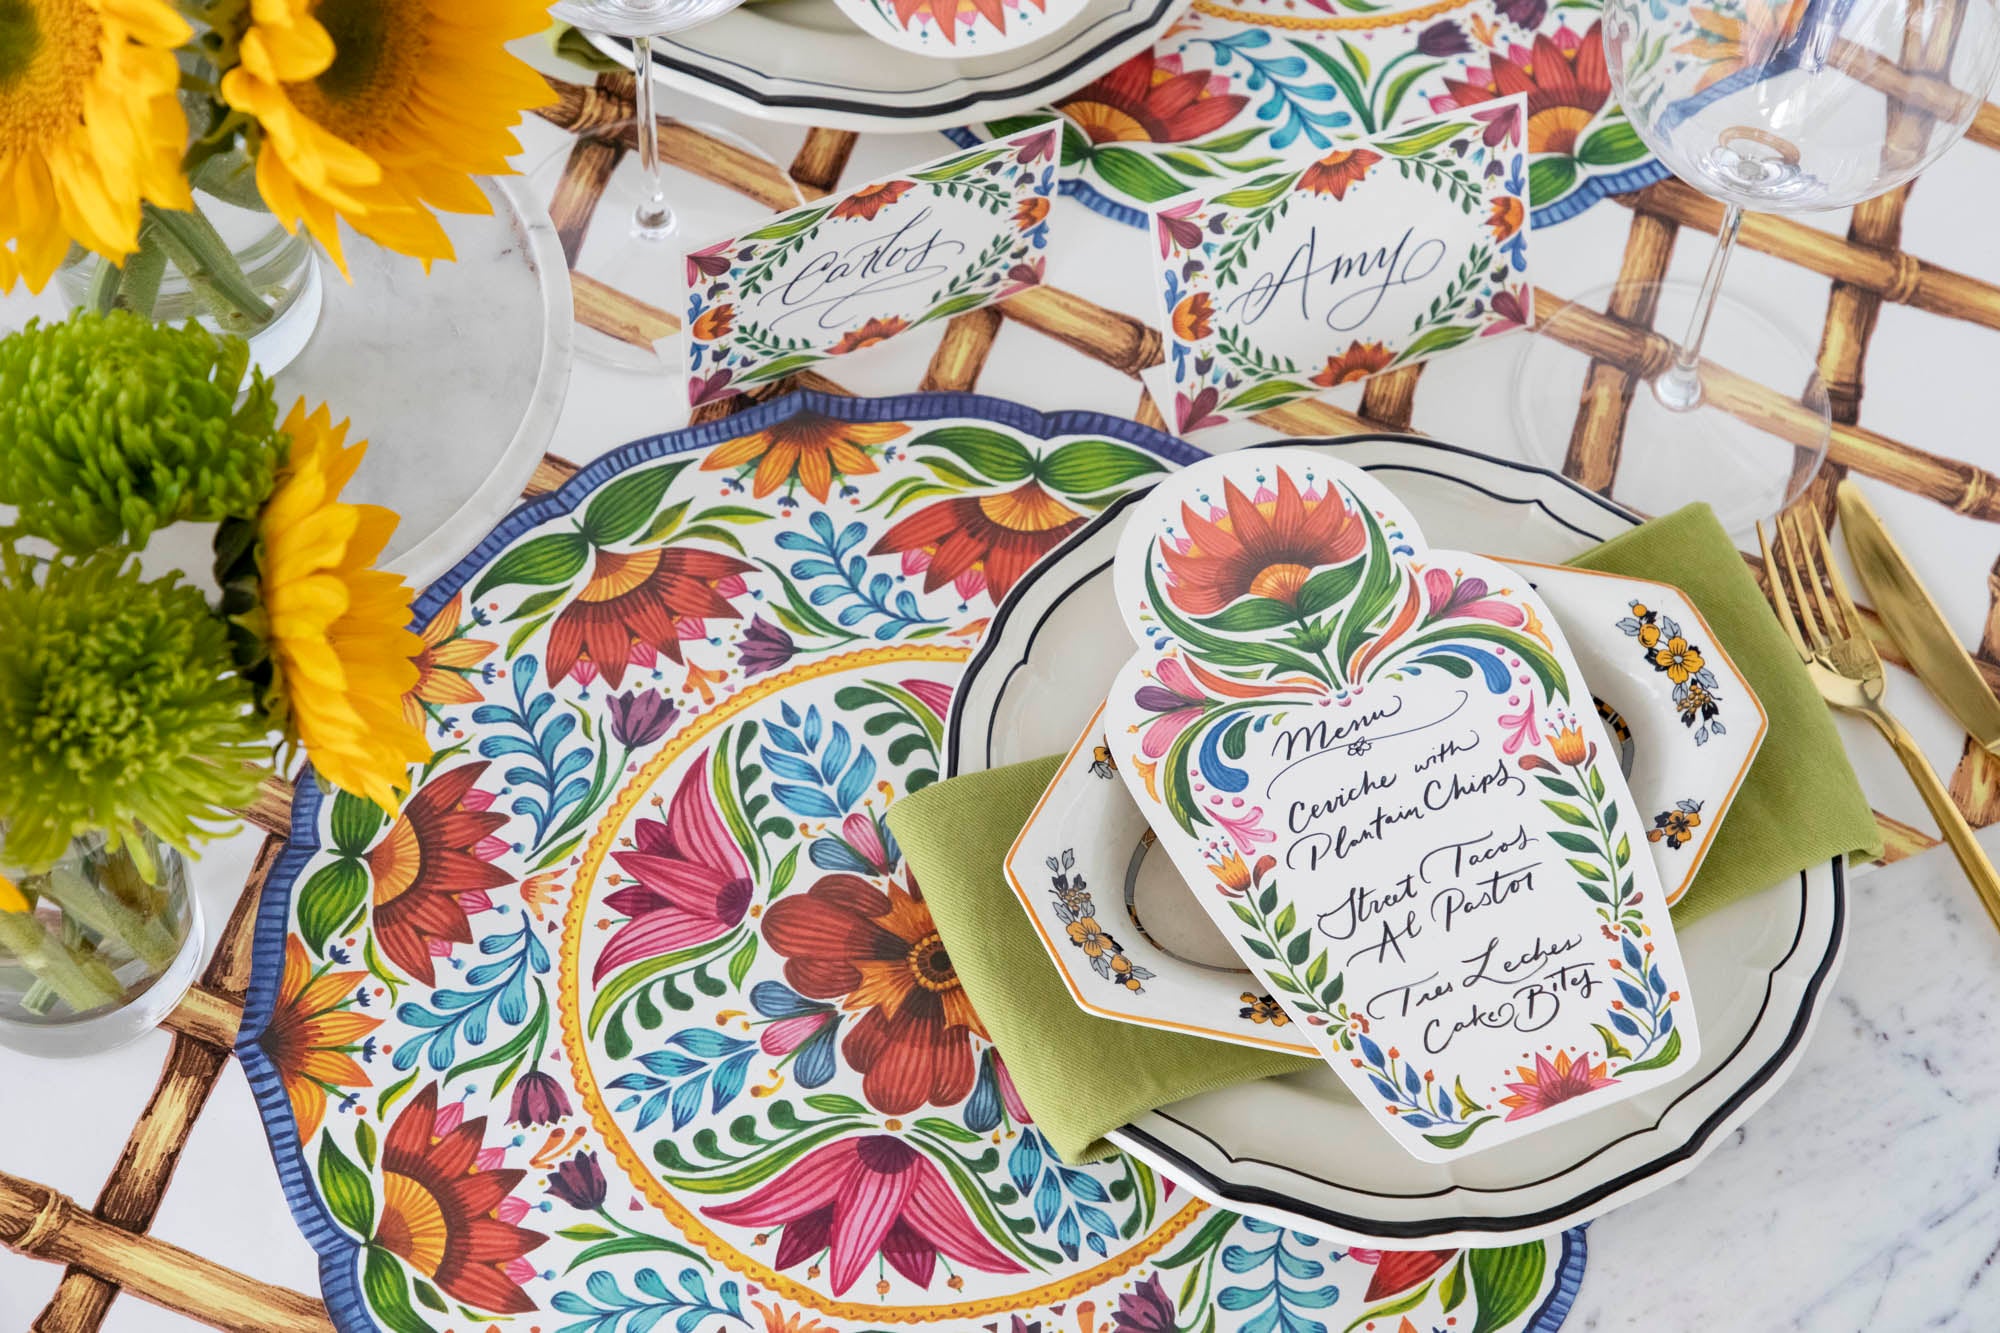 A vibrant place setting featuring a Fiesta Floral Table Card with a menu written on it in beautiful script resting on the plate.